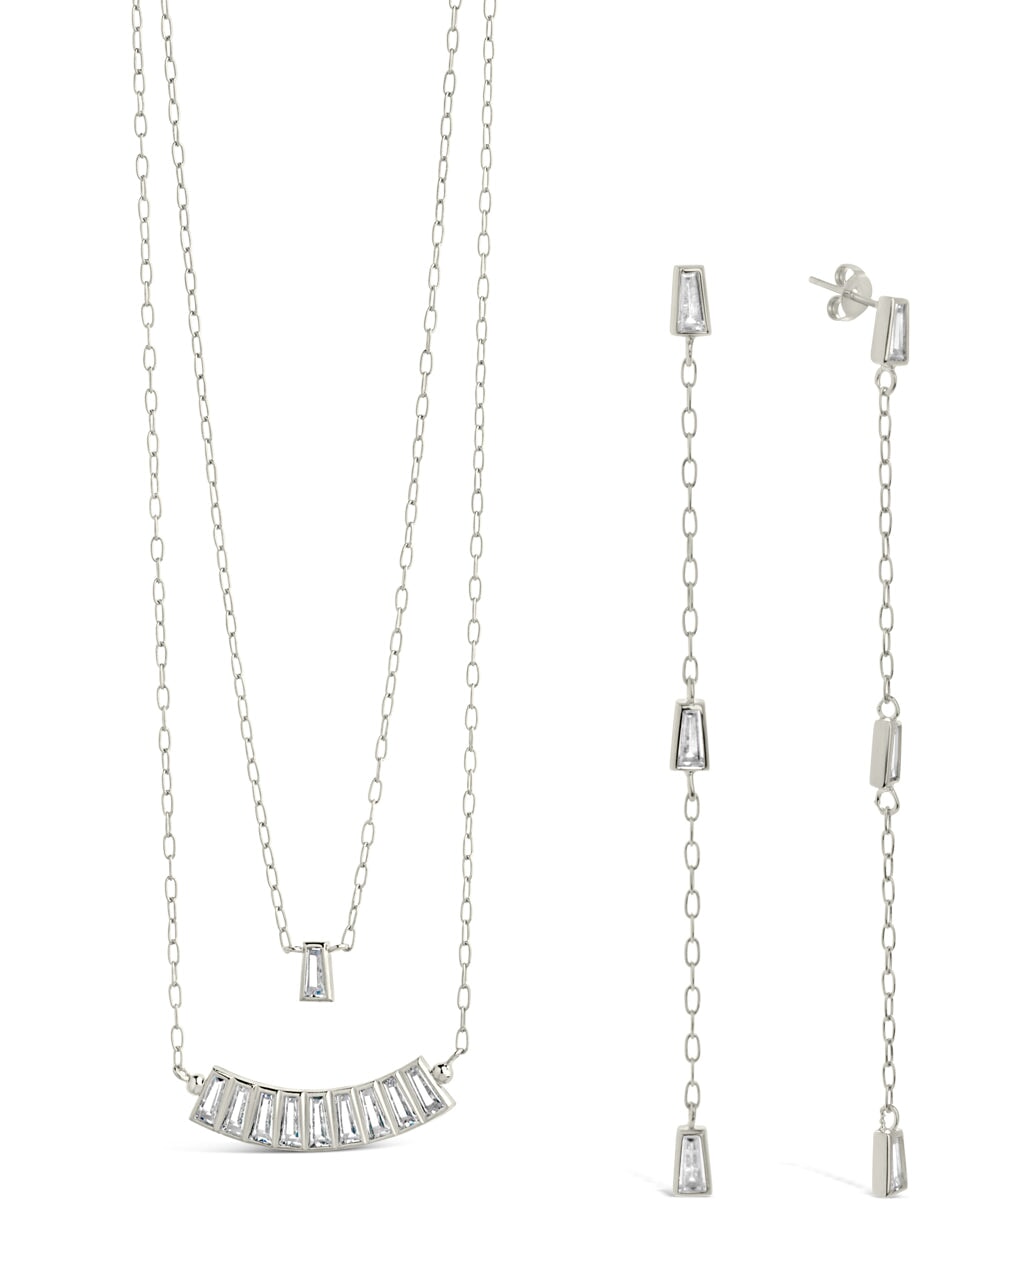 Tapered CZ Drop Earrings & Layered Necklace Set Bundles Sterling Forever Silver 